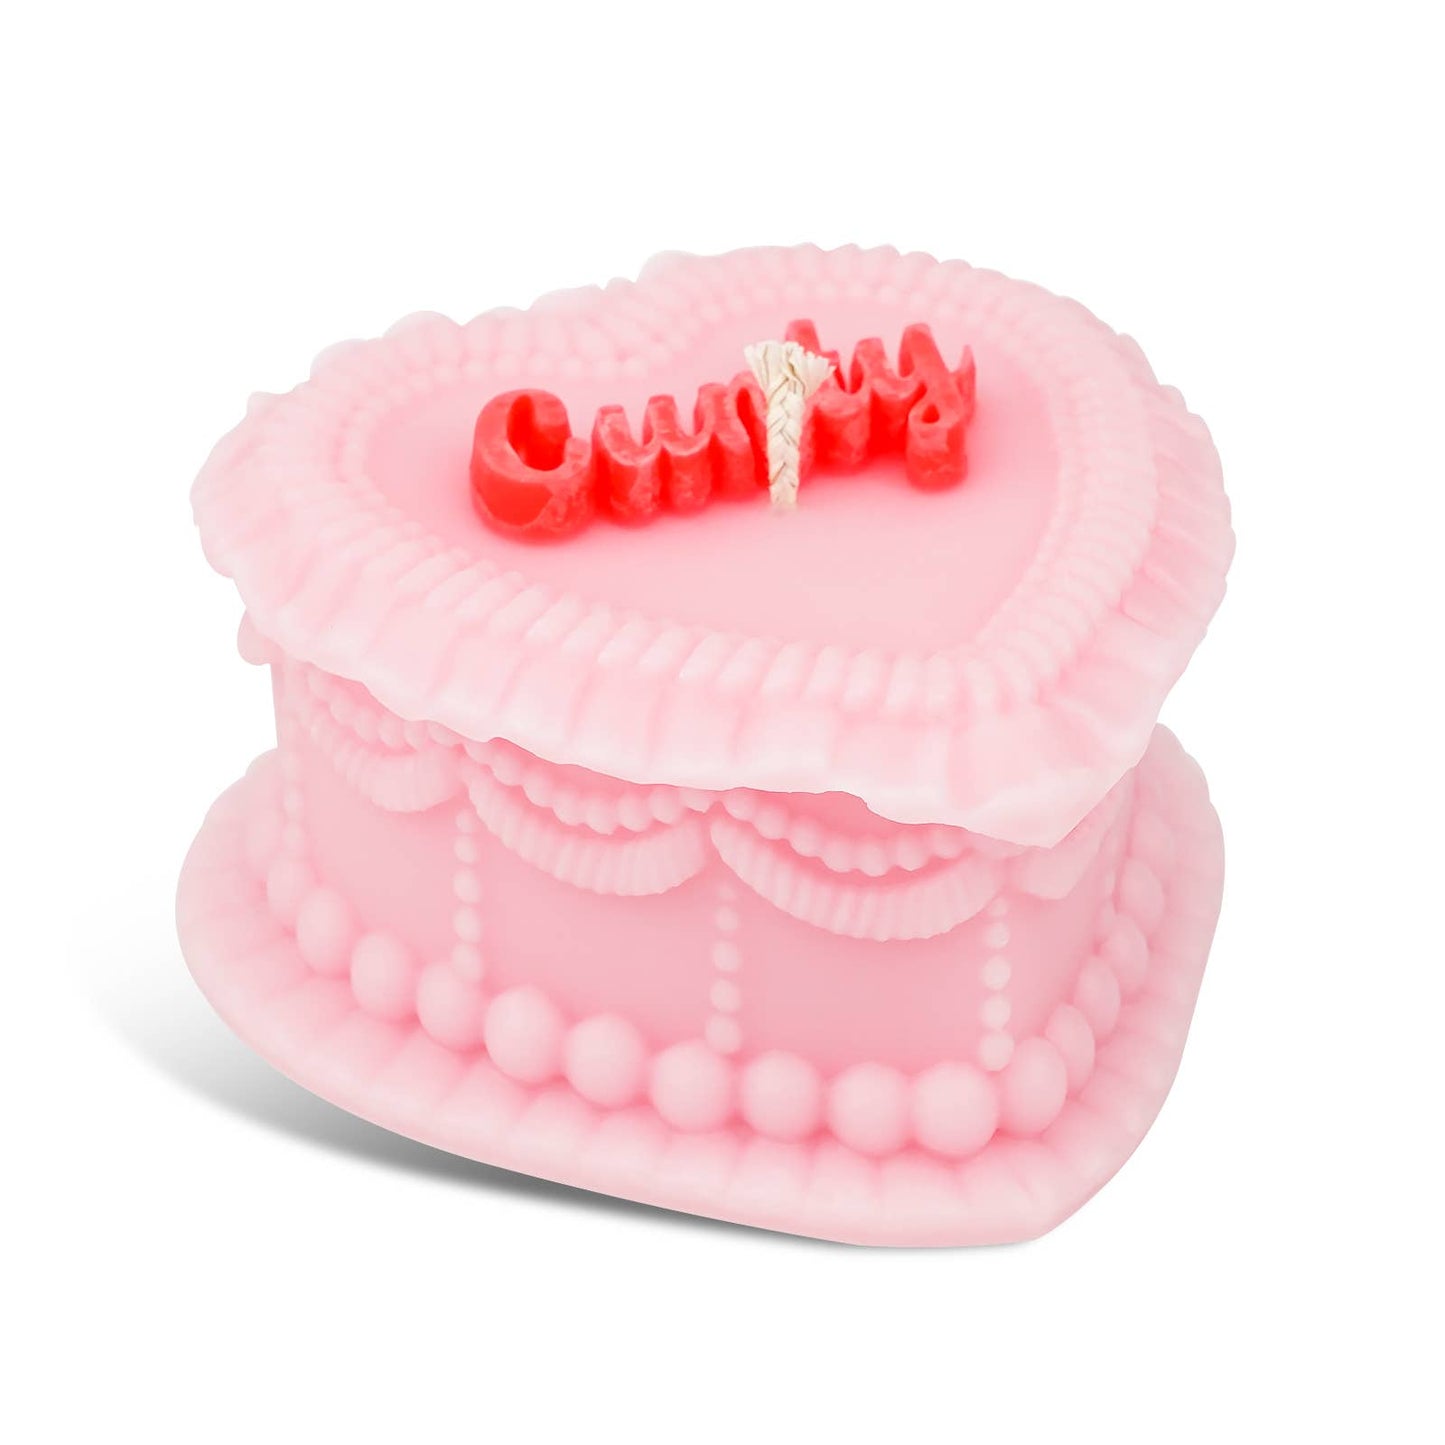 FUN CLUB - Cunty Heart Candle (cute, vintage cake candle, funny gift)